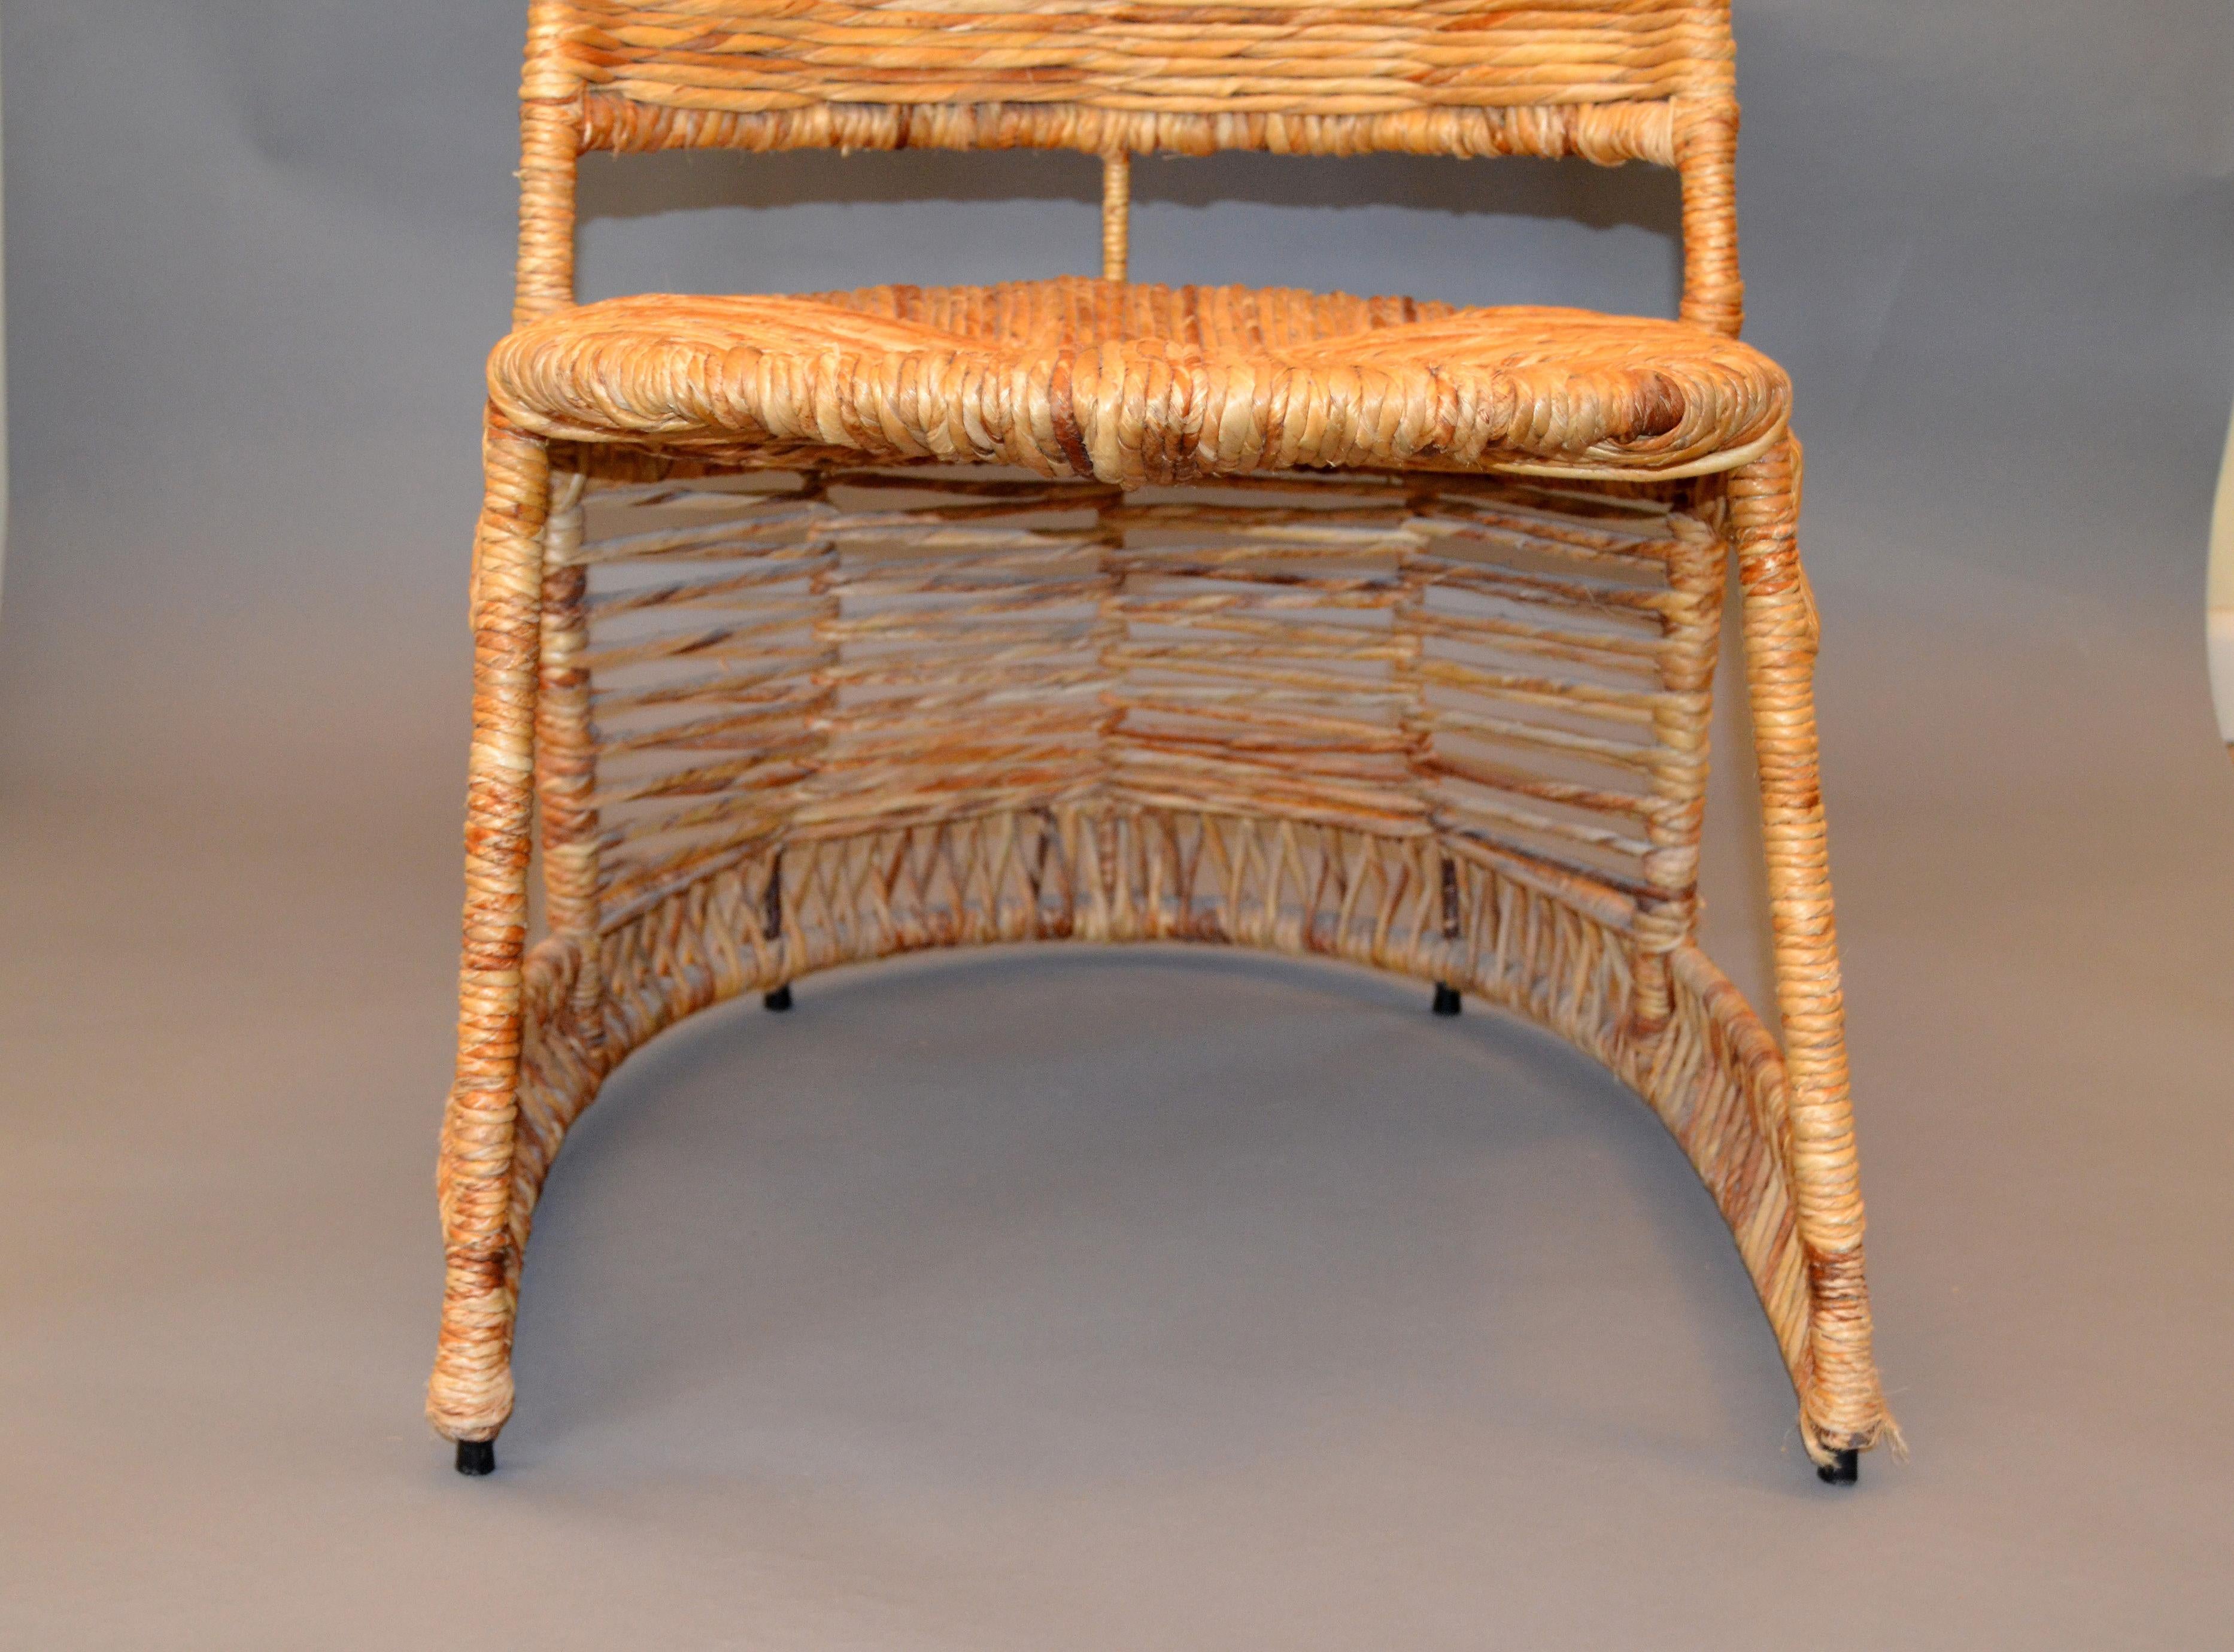 20th Century Vintage Entirely Handwoven Sculptural Cane and Rattan Side Chair with Rush Seat